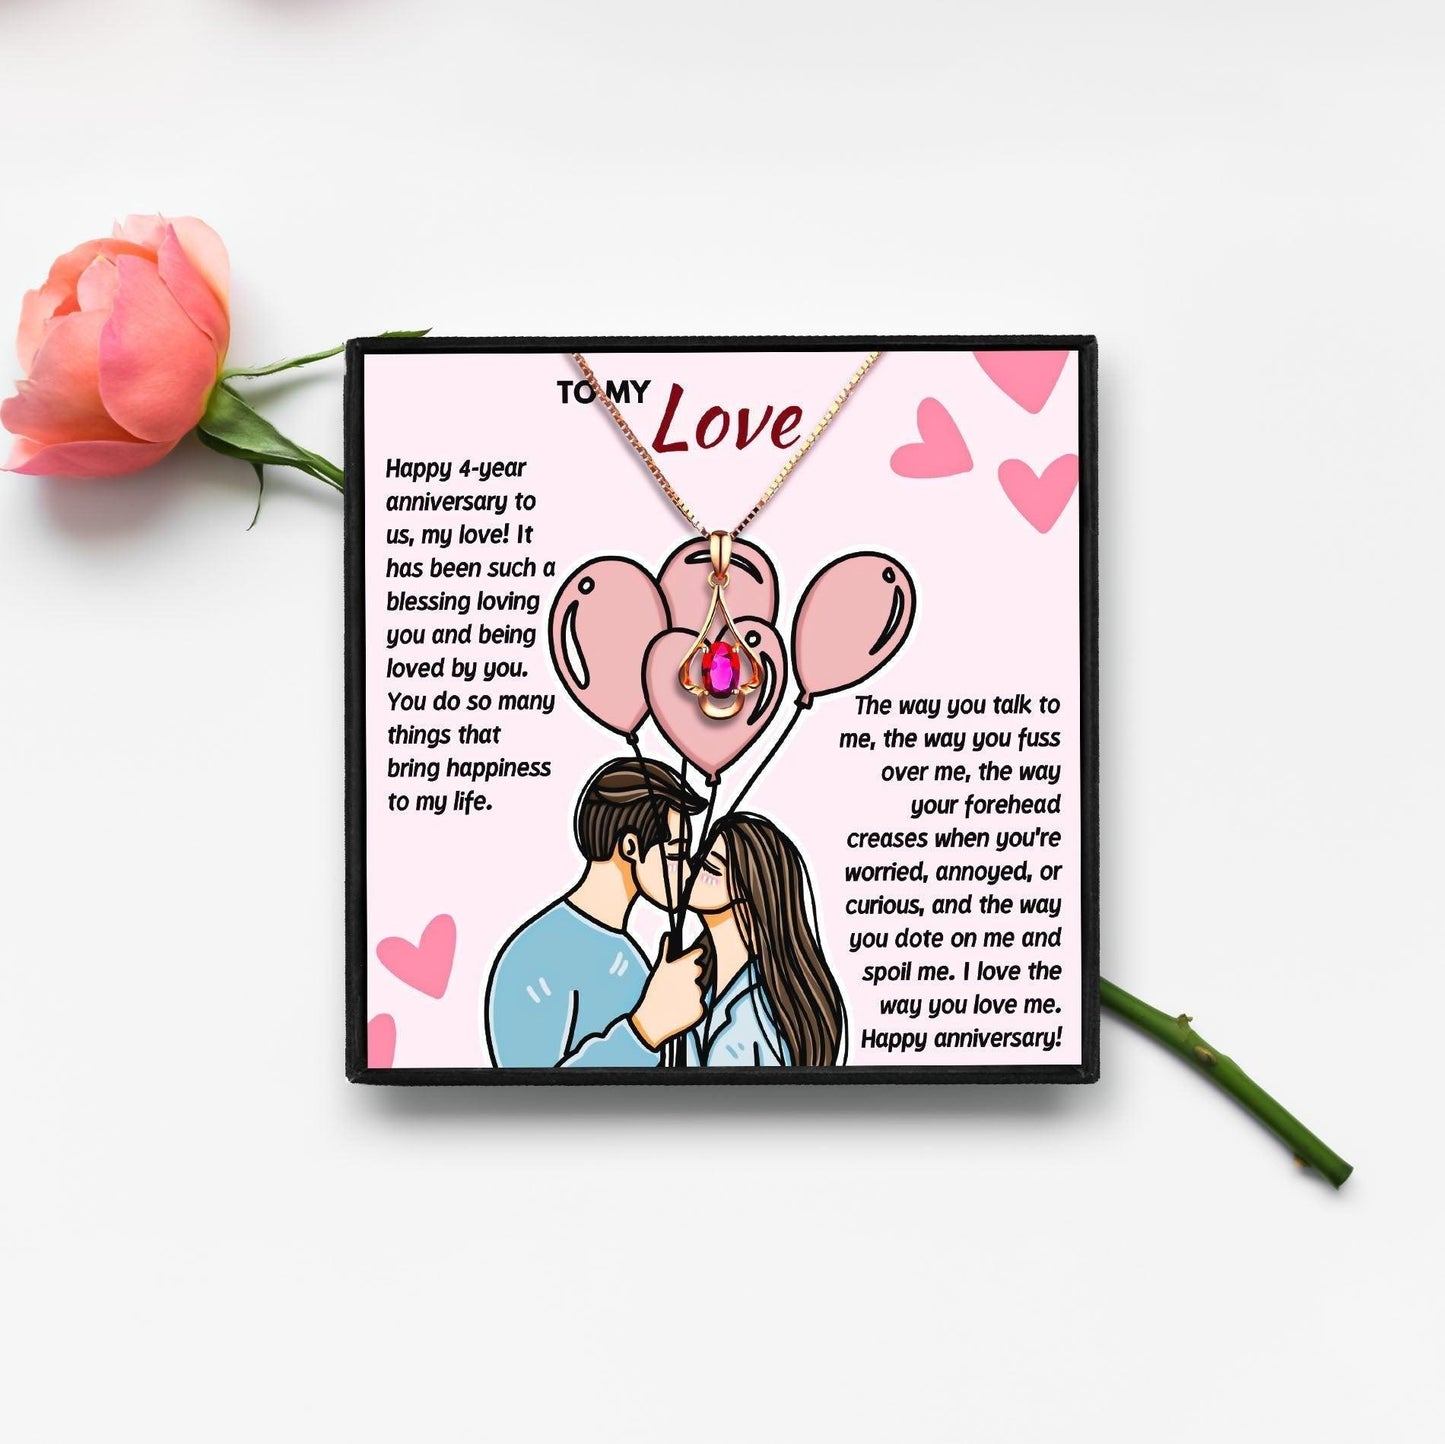 4th Anniversary Gift For Her in 2023 | 4th Anniversary Gift For Her - undefined | 4 year anniversary gift, 4th anniversary gift ideas, 4th wedding anniversary gifts, Anniversary Gifts, four anniversary gift | From Hunny Life | hunnylife.com